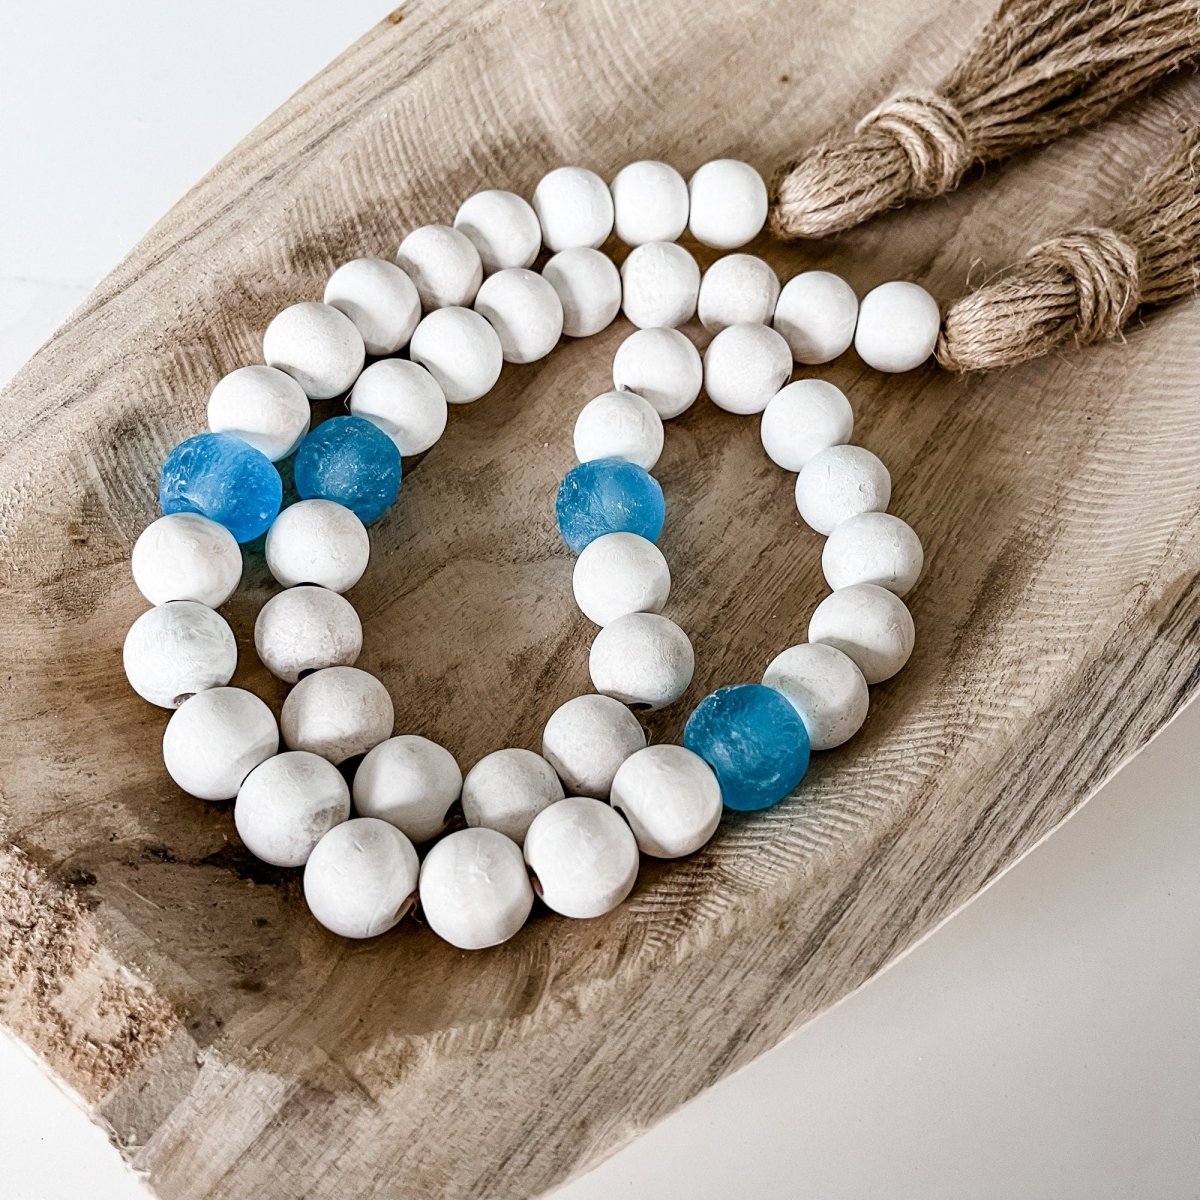 Whitewashed Wood Bead Garland with Jumbo Ice Blue Recycled Glass Beads - sonder and wolf